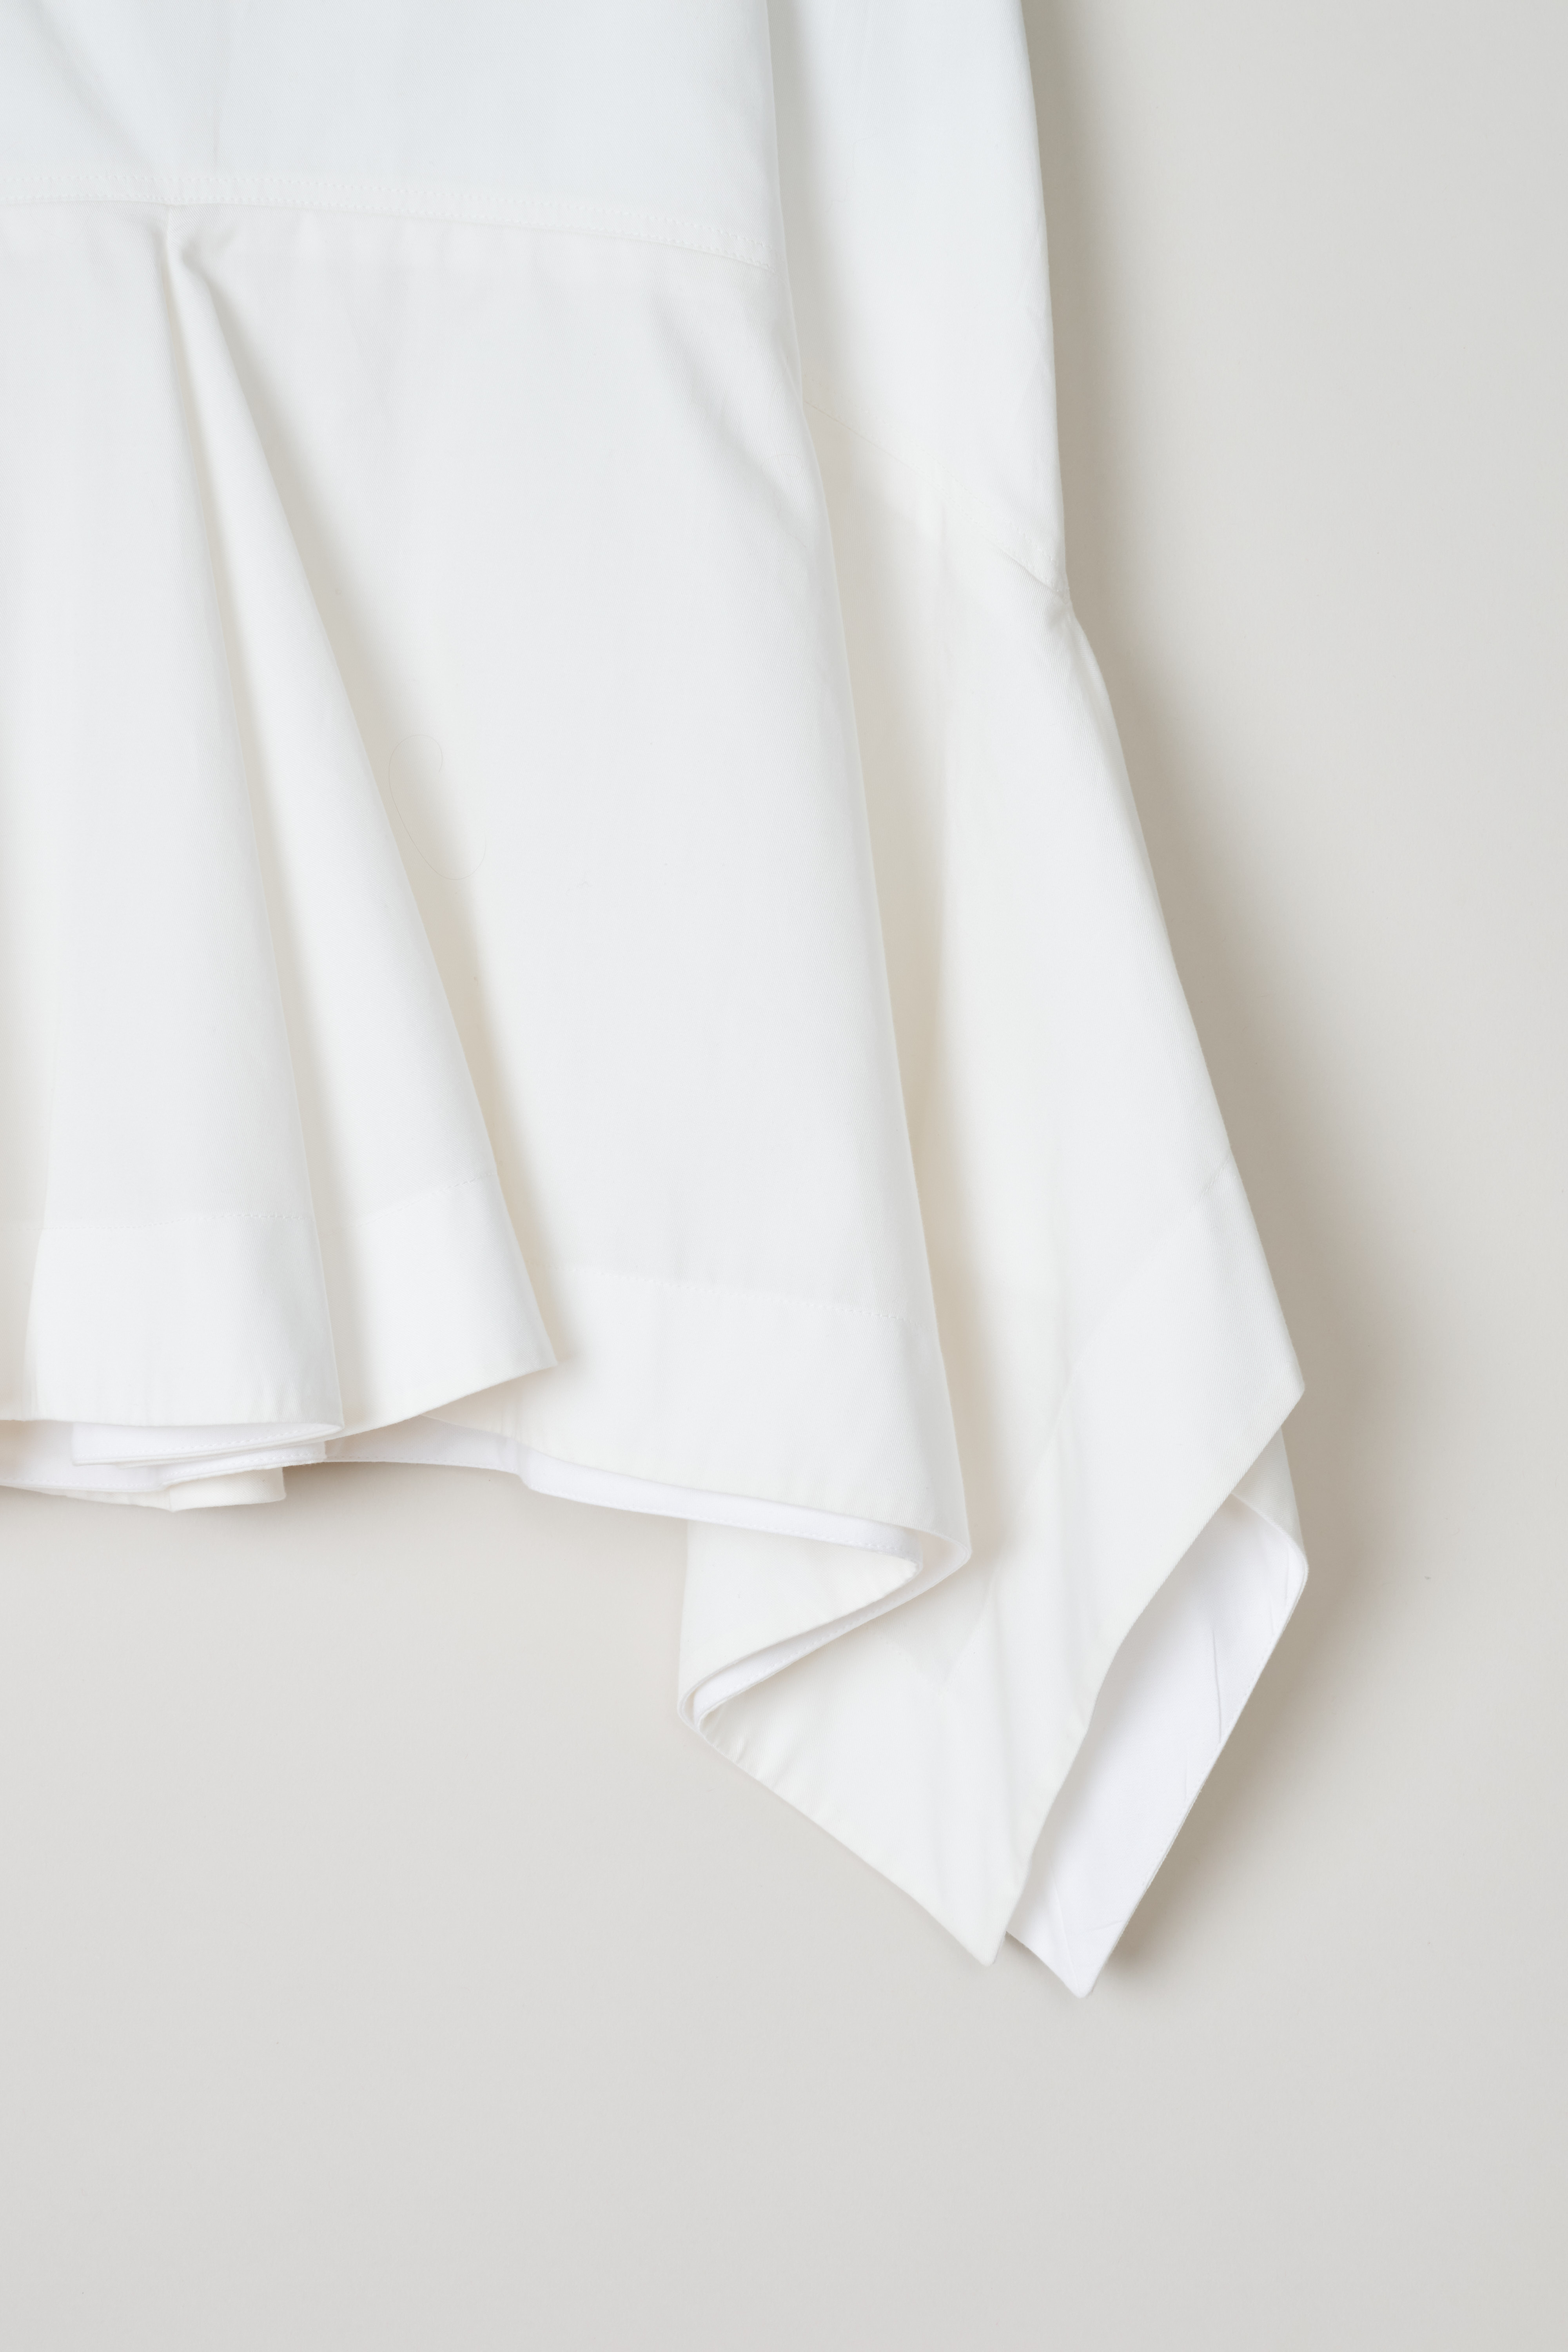 Calvin Klein 205W39NYC, White bell skirt, 91WWSC02_C173_101_white, white, detail, Midi skirt made of pure white cotton. Featuring a bell shaped model with a ruffled hemline. There is a concealed zipper on the side seam. 